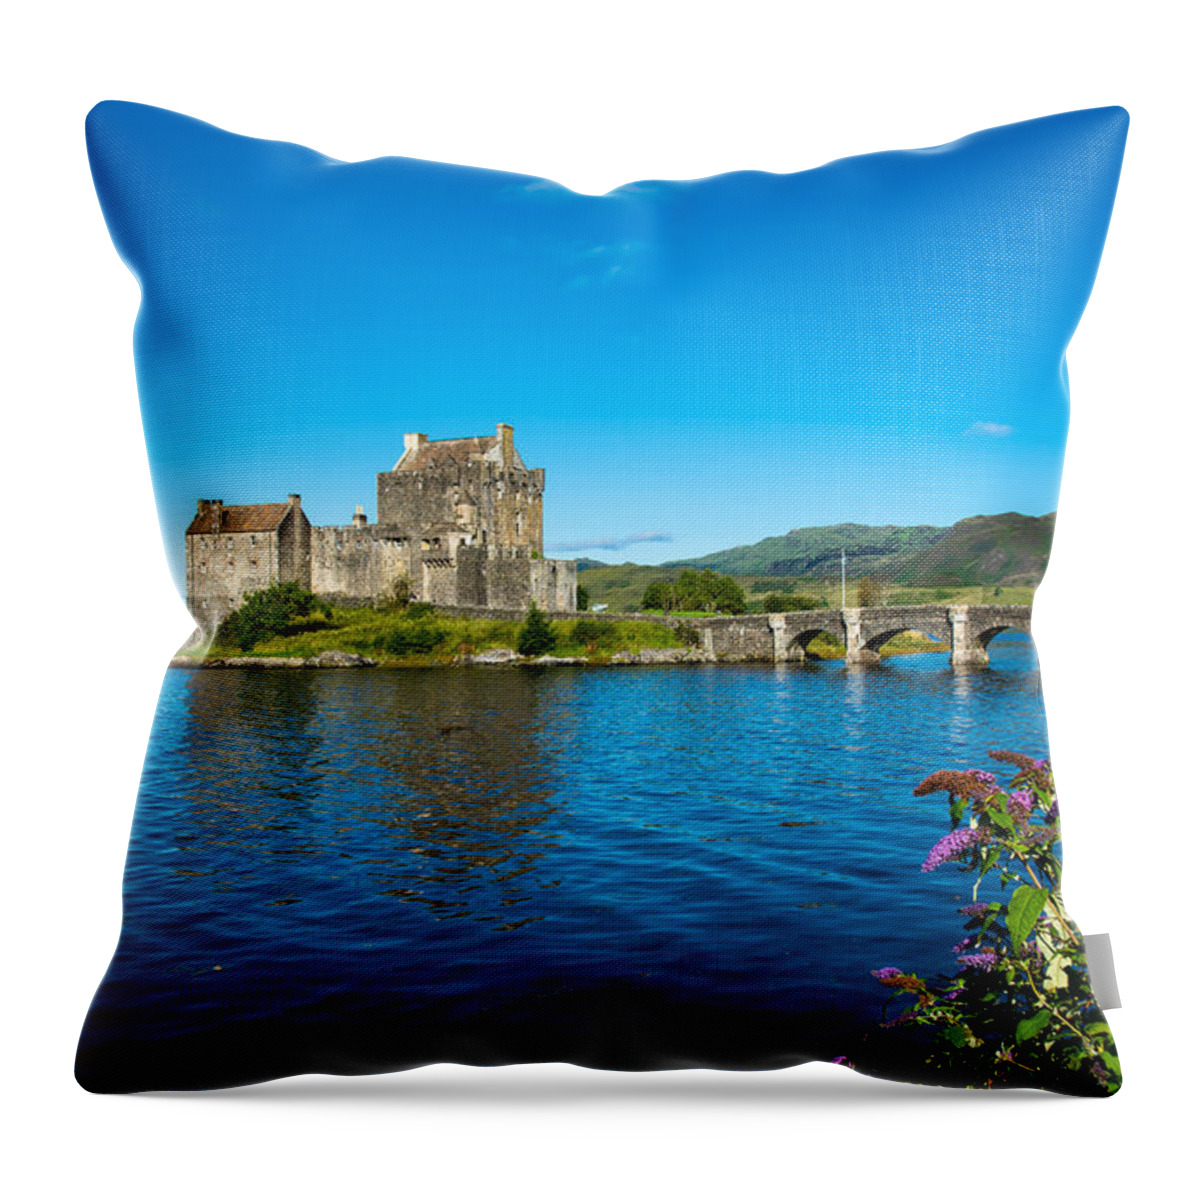 Scotland Throw Pillow featuring the photograph Eilean Donan Castle In Scotland #2 by Andreas Berthold